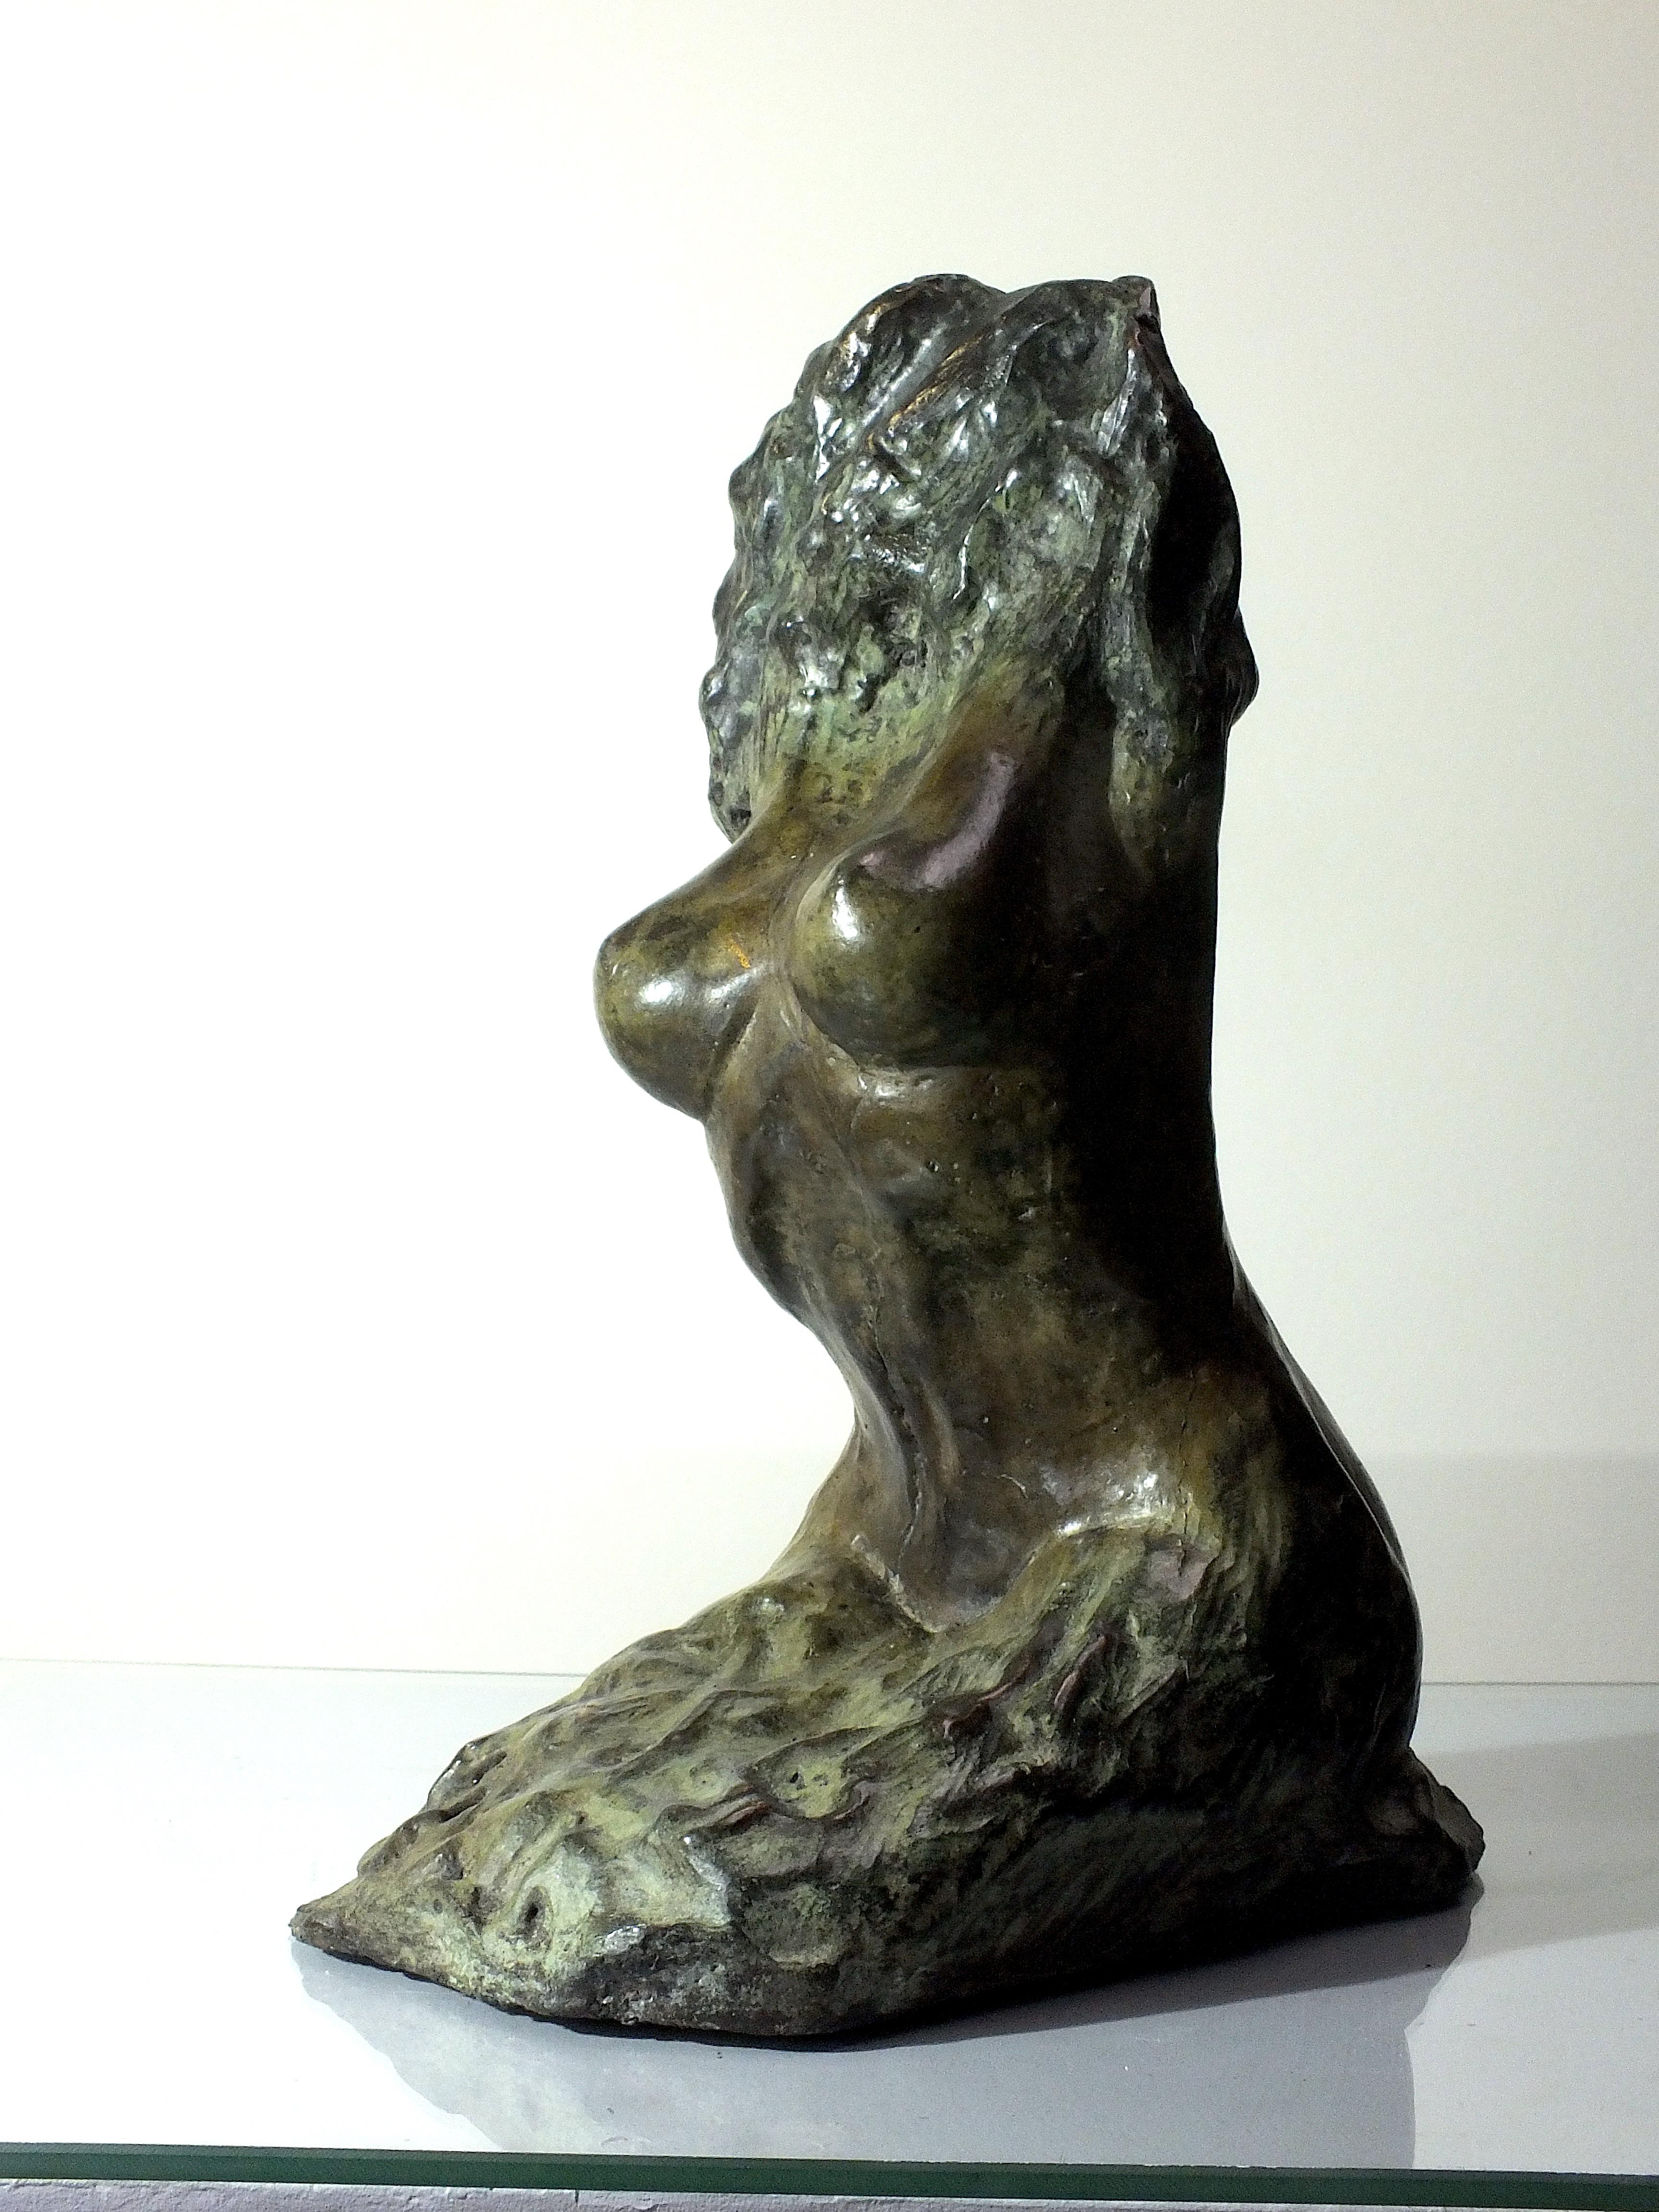 Emergent Figure 1 of 10

Tim Rawlin is a contemplative artist who explores the idea of self & identity. In this piece it's almost as if the soul has been laid bare allowing one to speculate about who we are. It's a reflective and tactile sculpture.